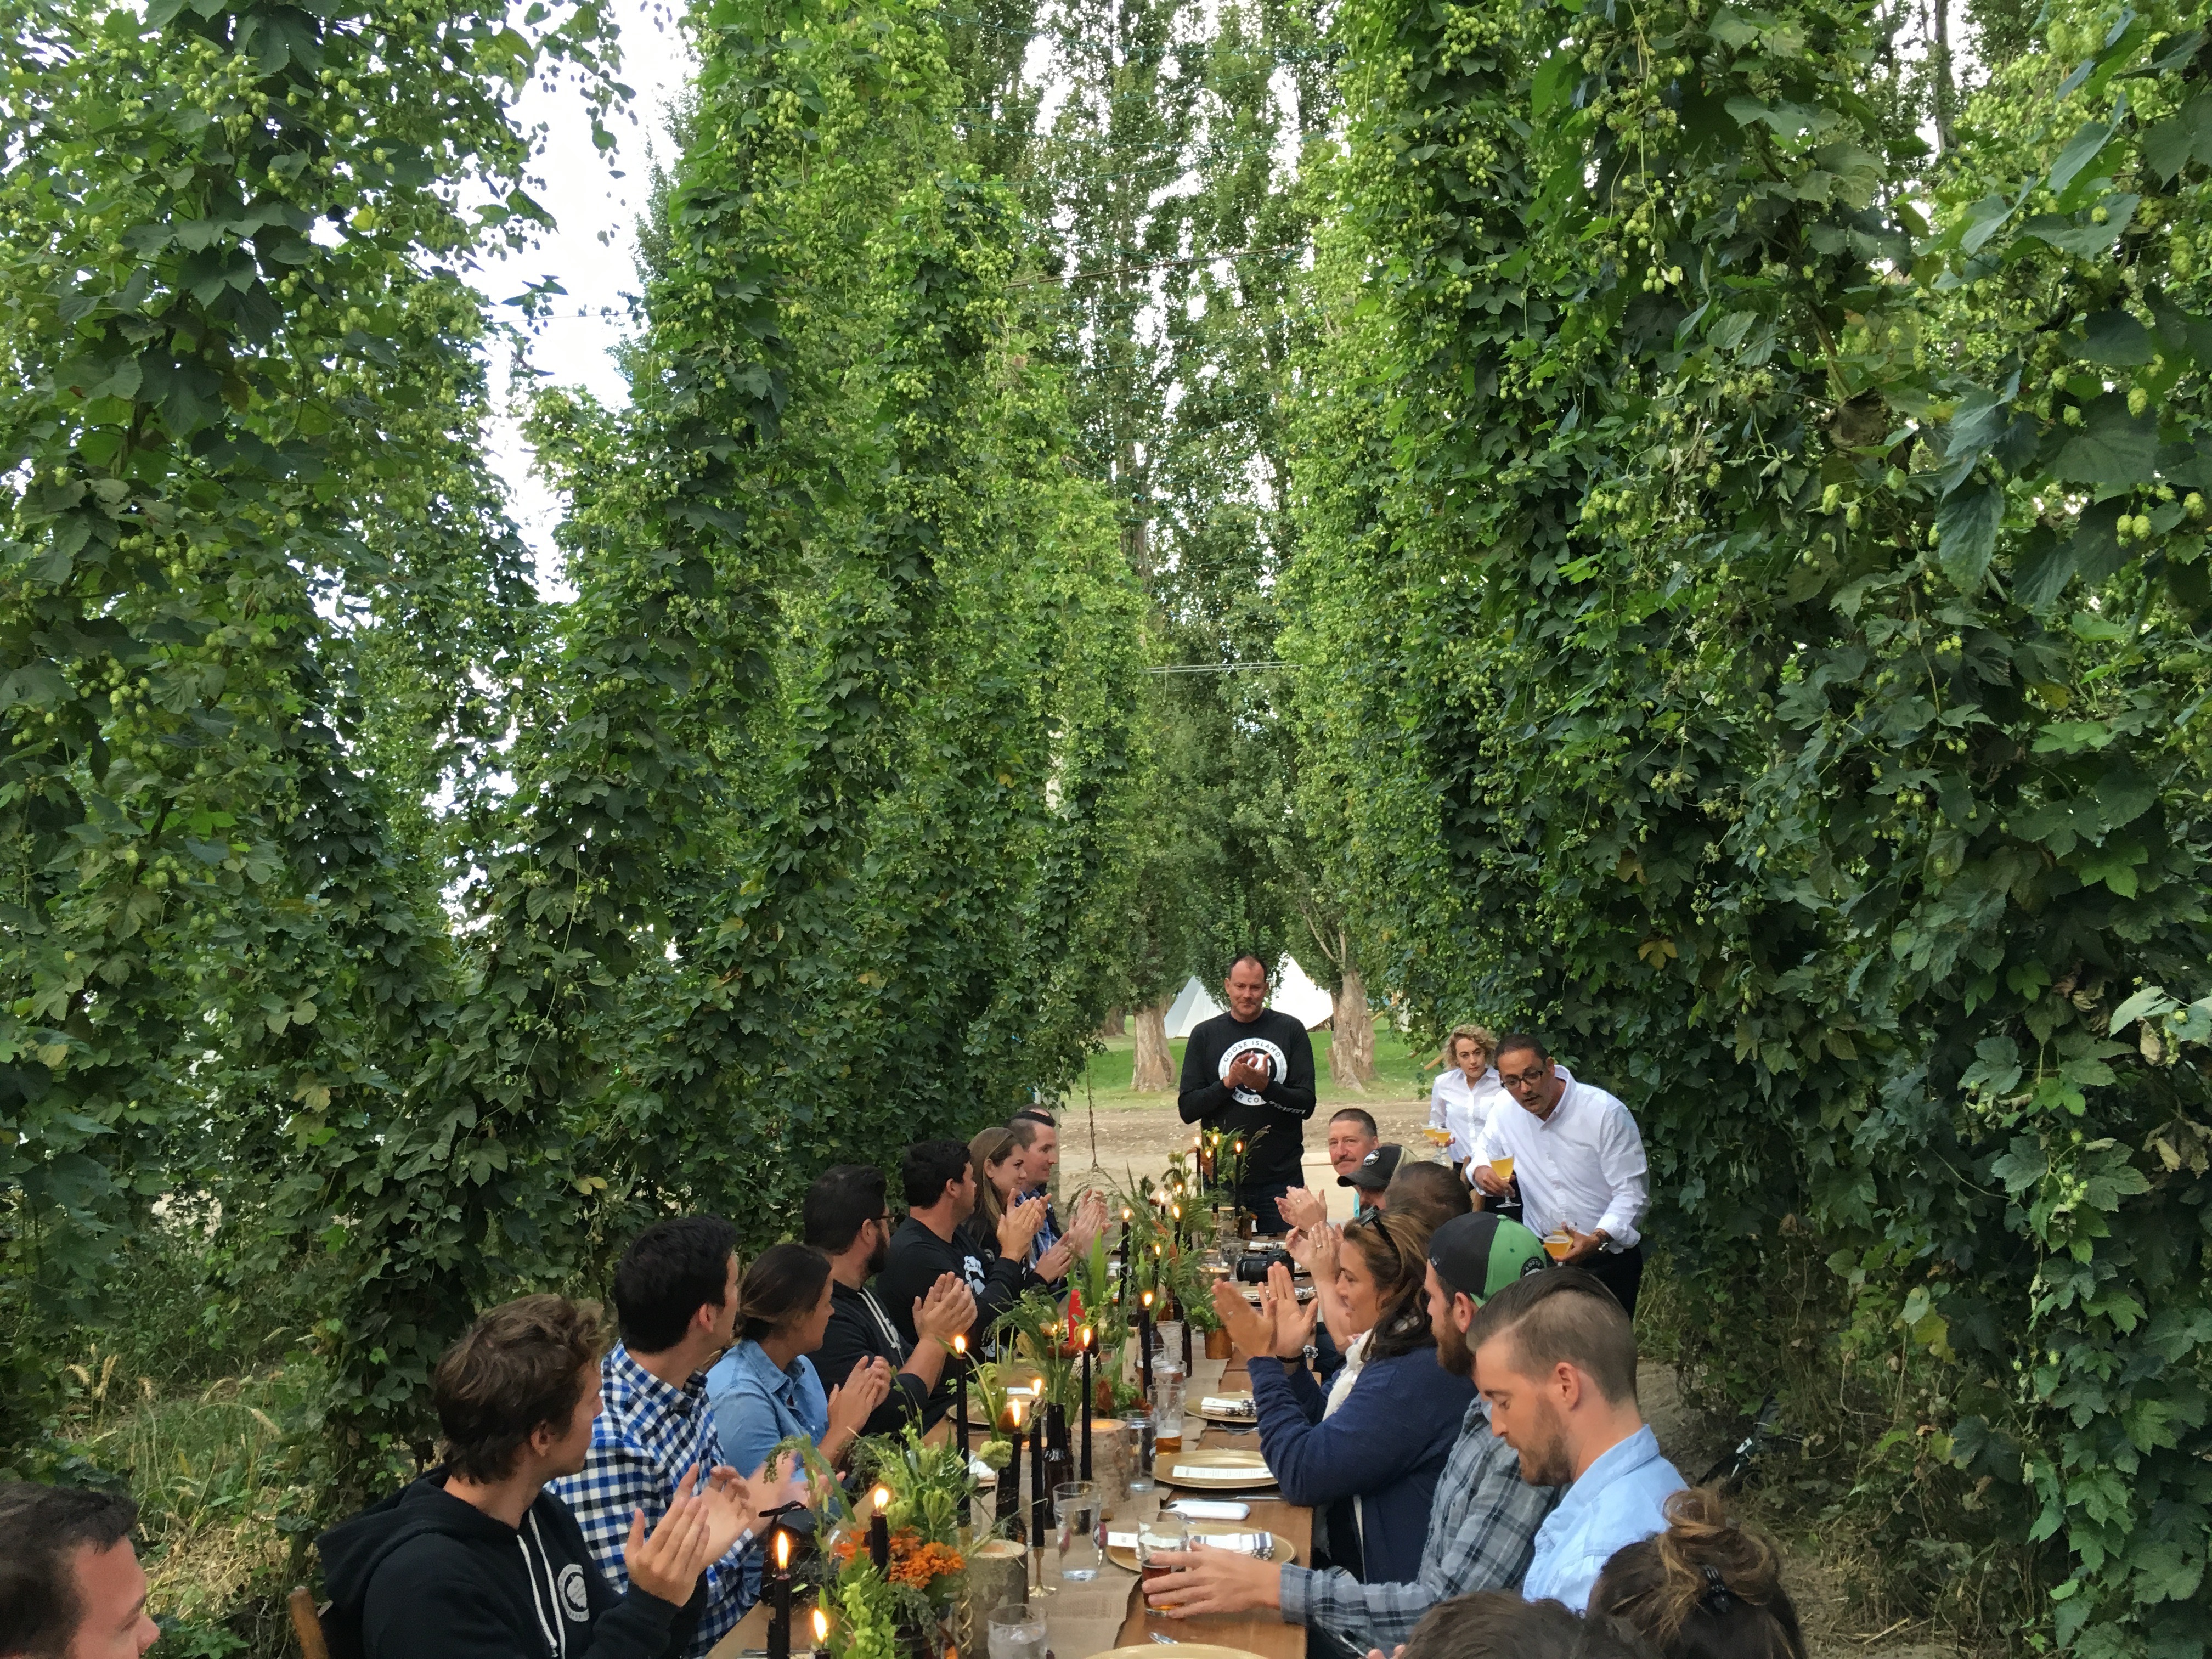 Mark Kamarauskas, Director of Operations at Goose Island welcomes the group to the Farewell Beer Dinner at Elk Mountain Farms.